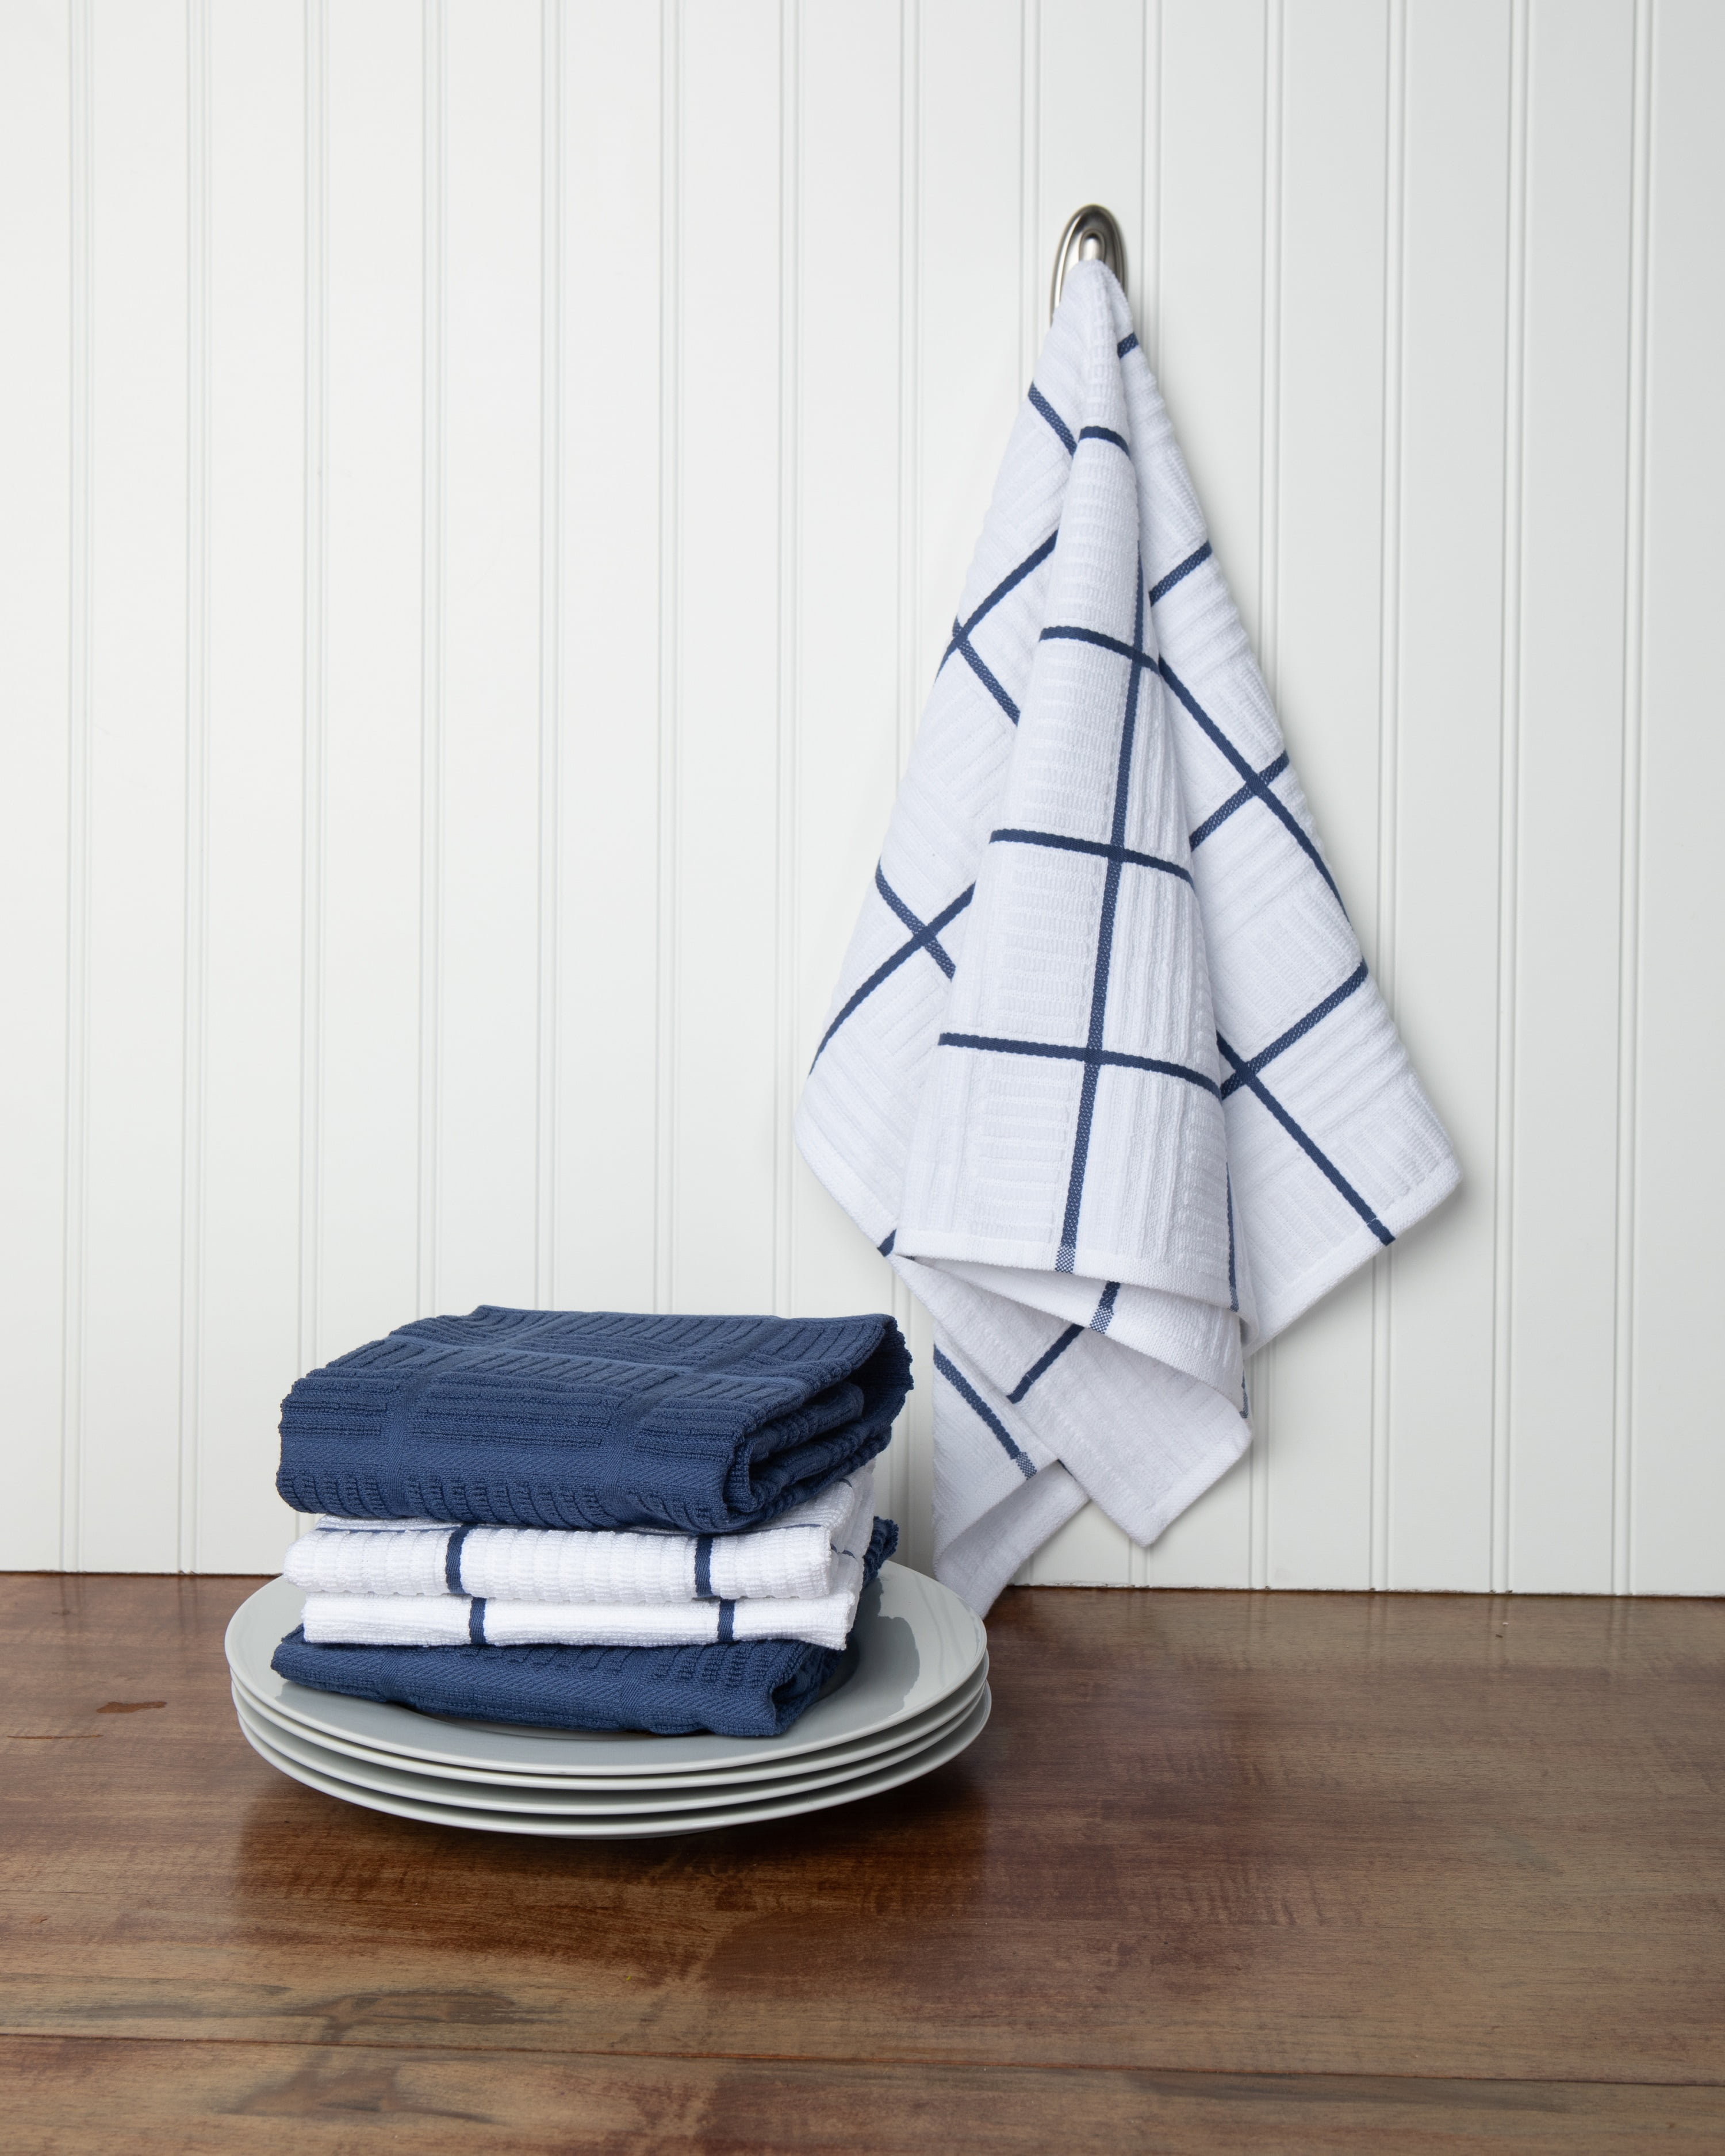 Kitchen Dish Towels 100% Cotton 19x26 Pack of 9 Blue and White Variations